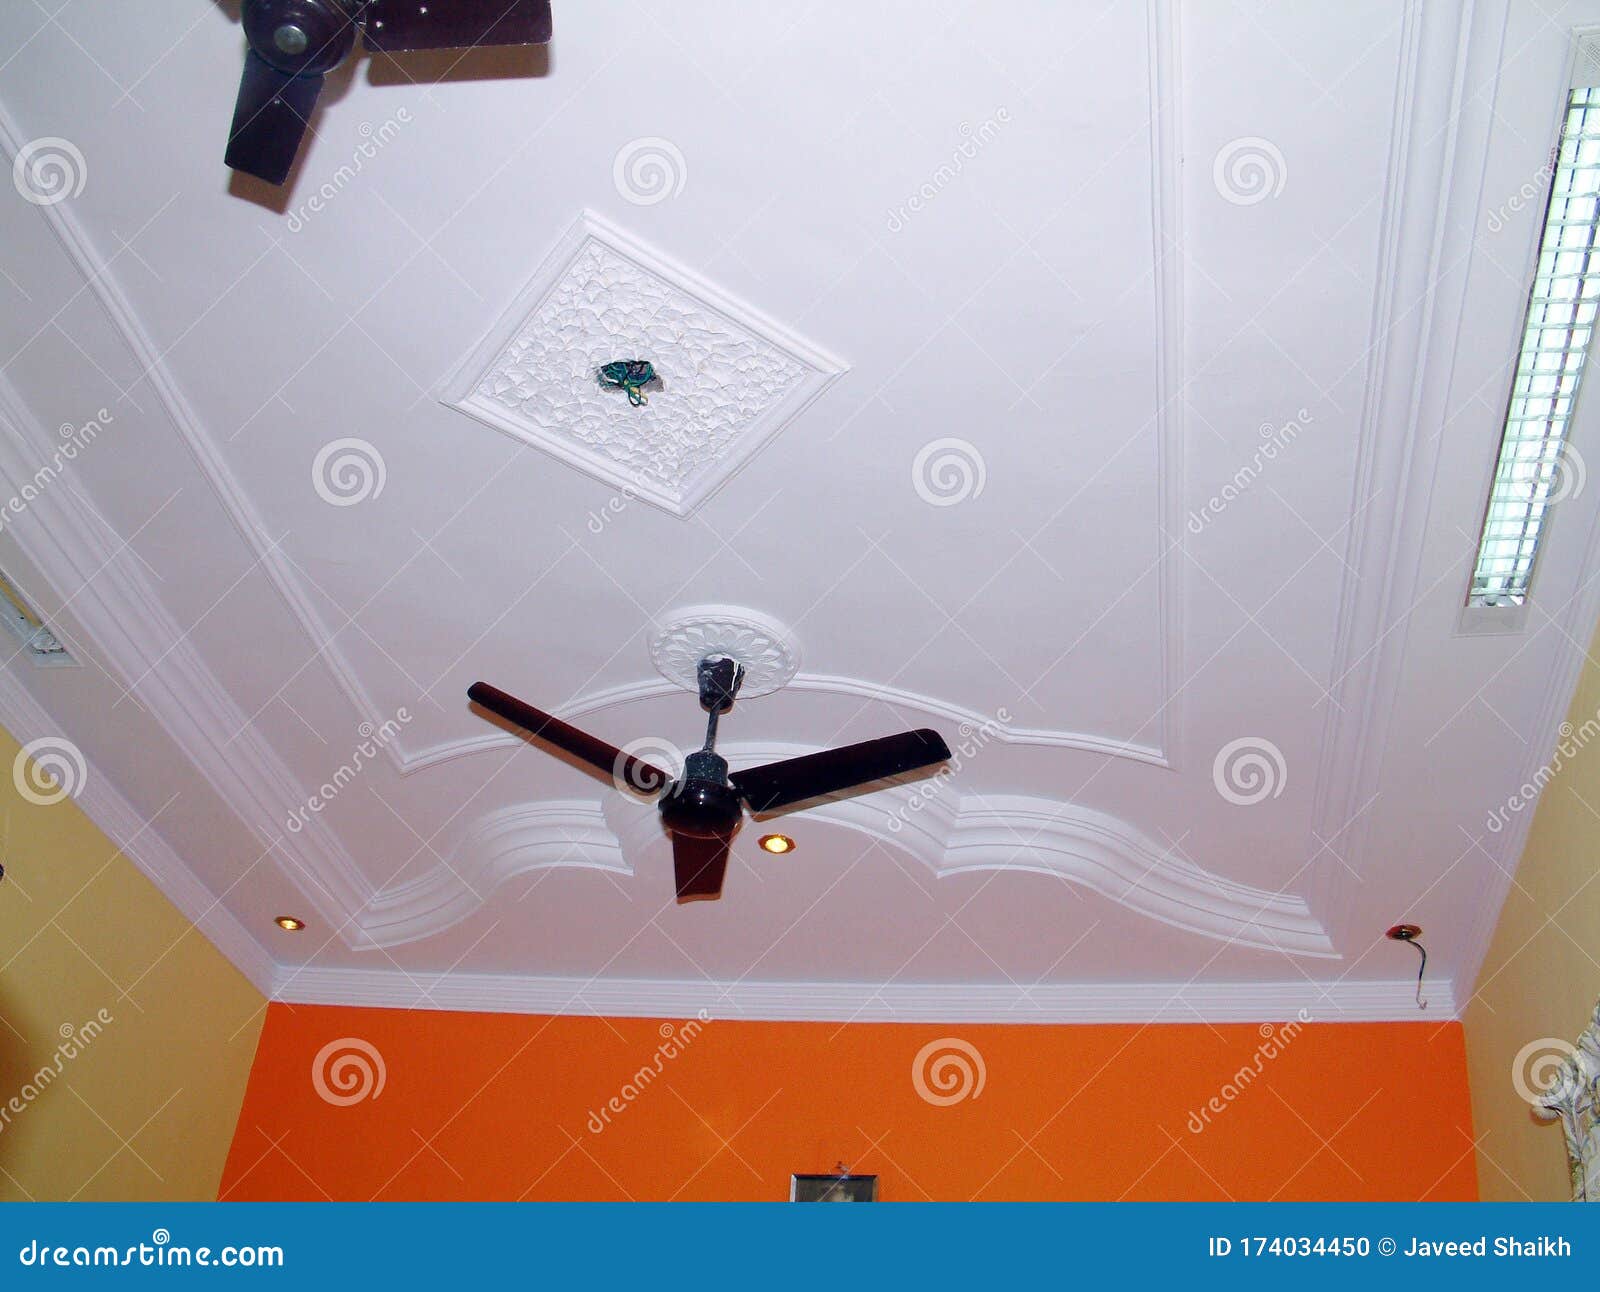 guitar tag på sightseeing Link Search Results Images for Pop Ceiling Design - Some Creative Interior Design  Ideas Stock Photo - Image of living, size: 174034450